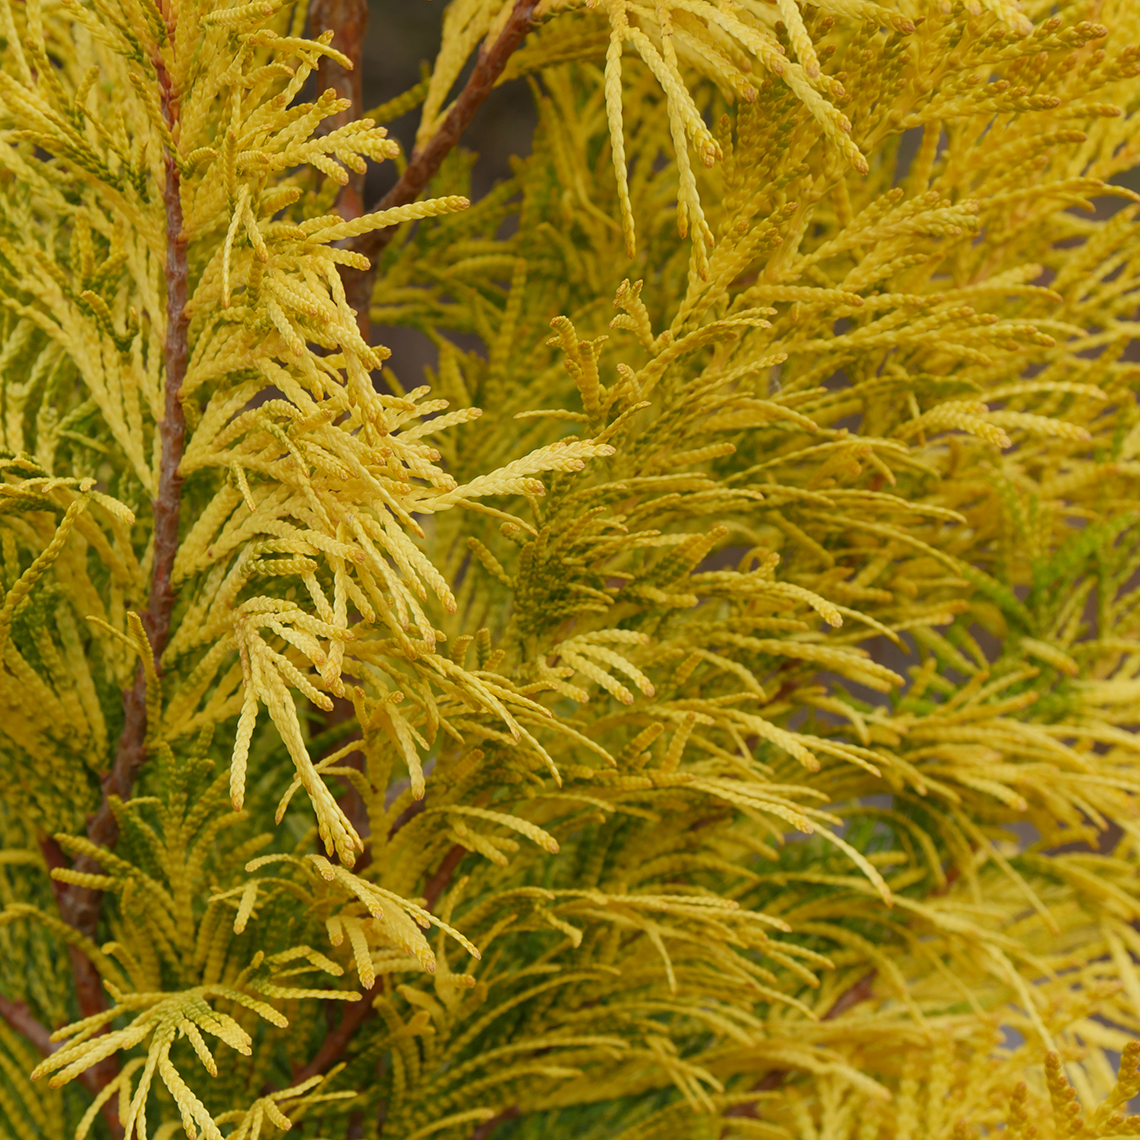 Closeup of the feathery golden foliage of Fluffy Western arborvitae